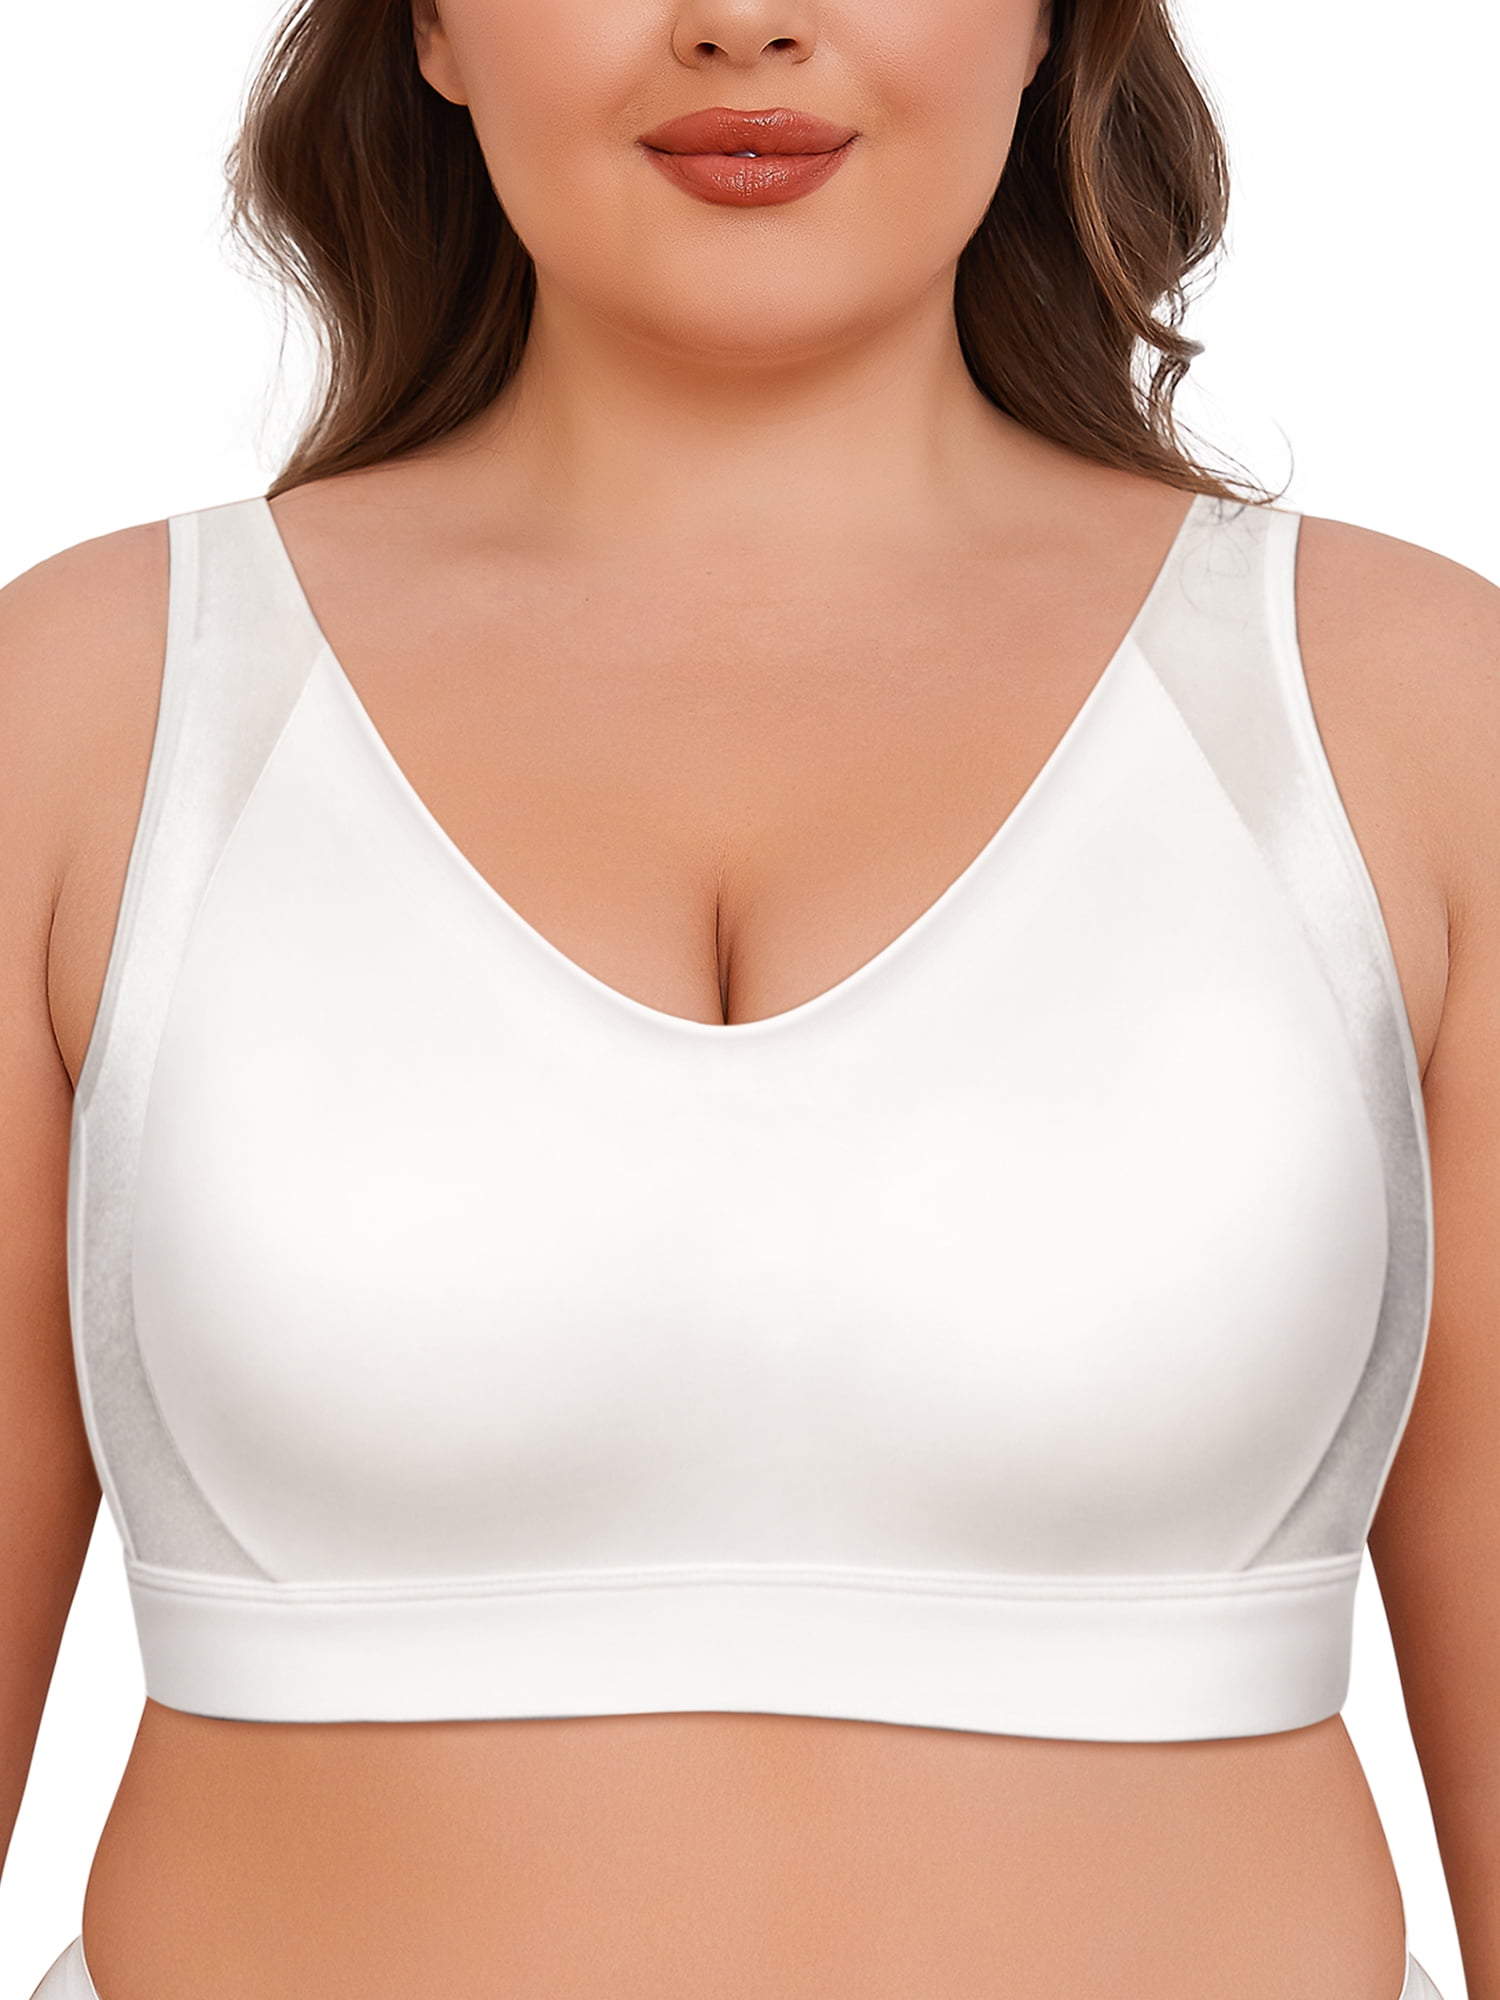 KDDYLITQ Camisoles for Large Breasts Plus Size T Shirt Bras for Women 32c  Plunge Shapewear High Impact Sports Bras for Women Padded Wireless  Bralettes for Women Complexion 38D 